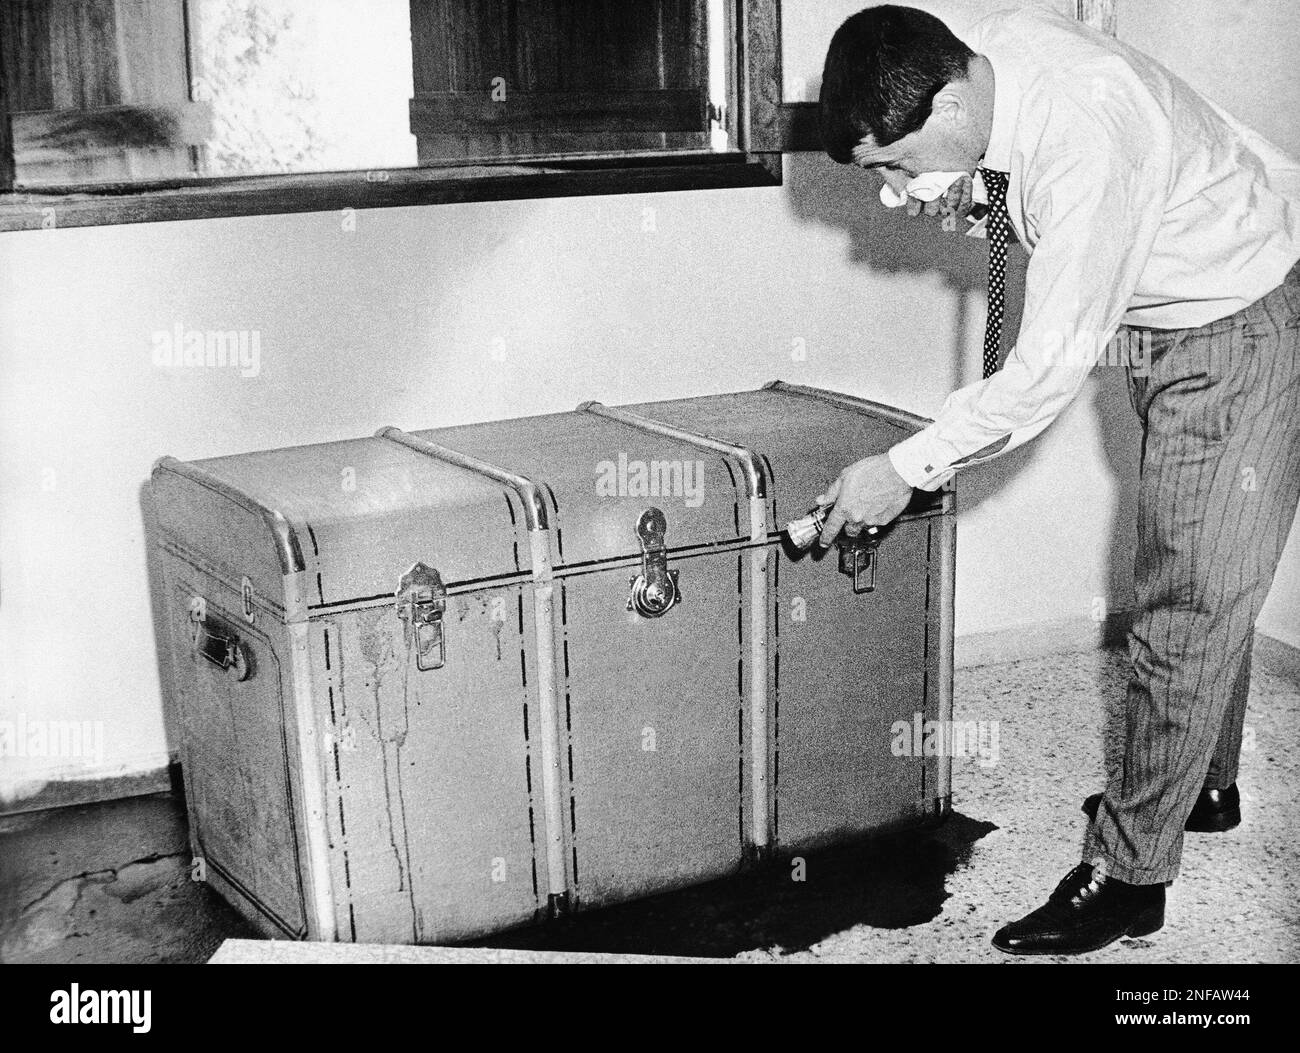 The body of the elder Herberts Cukurs, accused of killing 30,000 Jews in Latvia in World War II, was found in a trunk in Montevideo, Uruguay, March 6, 1965. Man opening trunk is unidentified. (AP Photo) Stock Photo